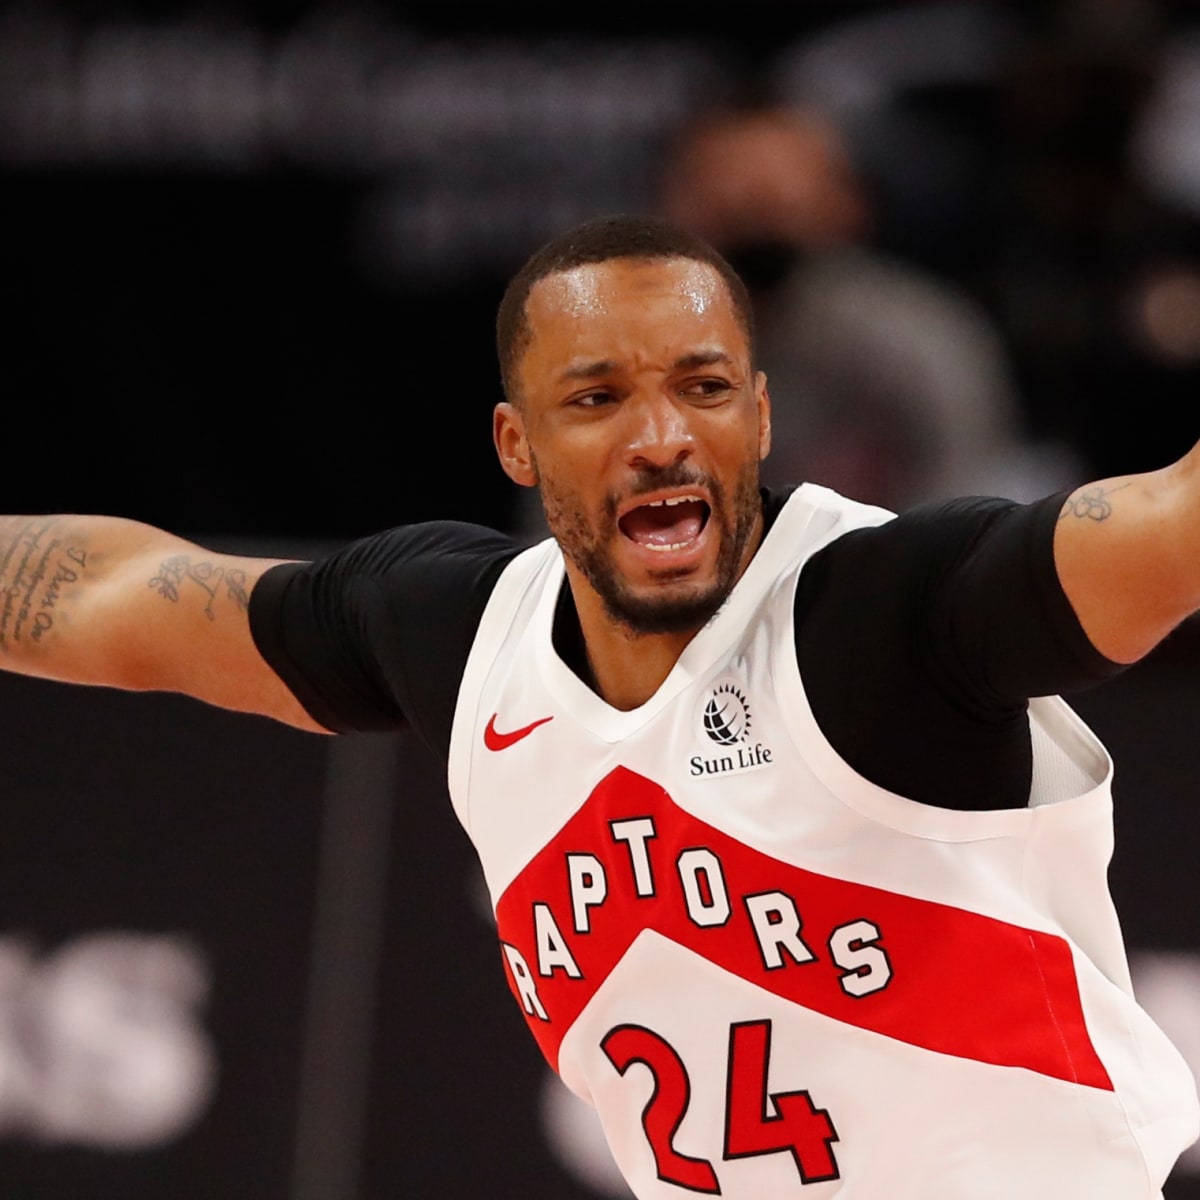 norman powell jersey